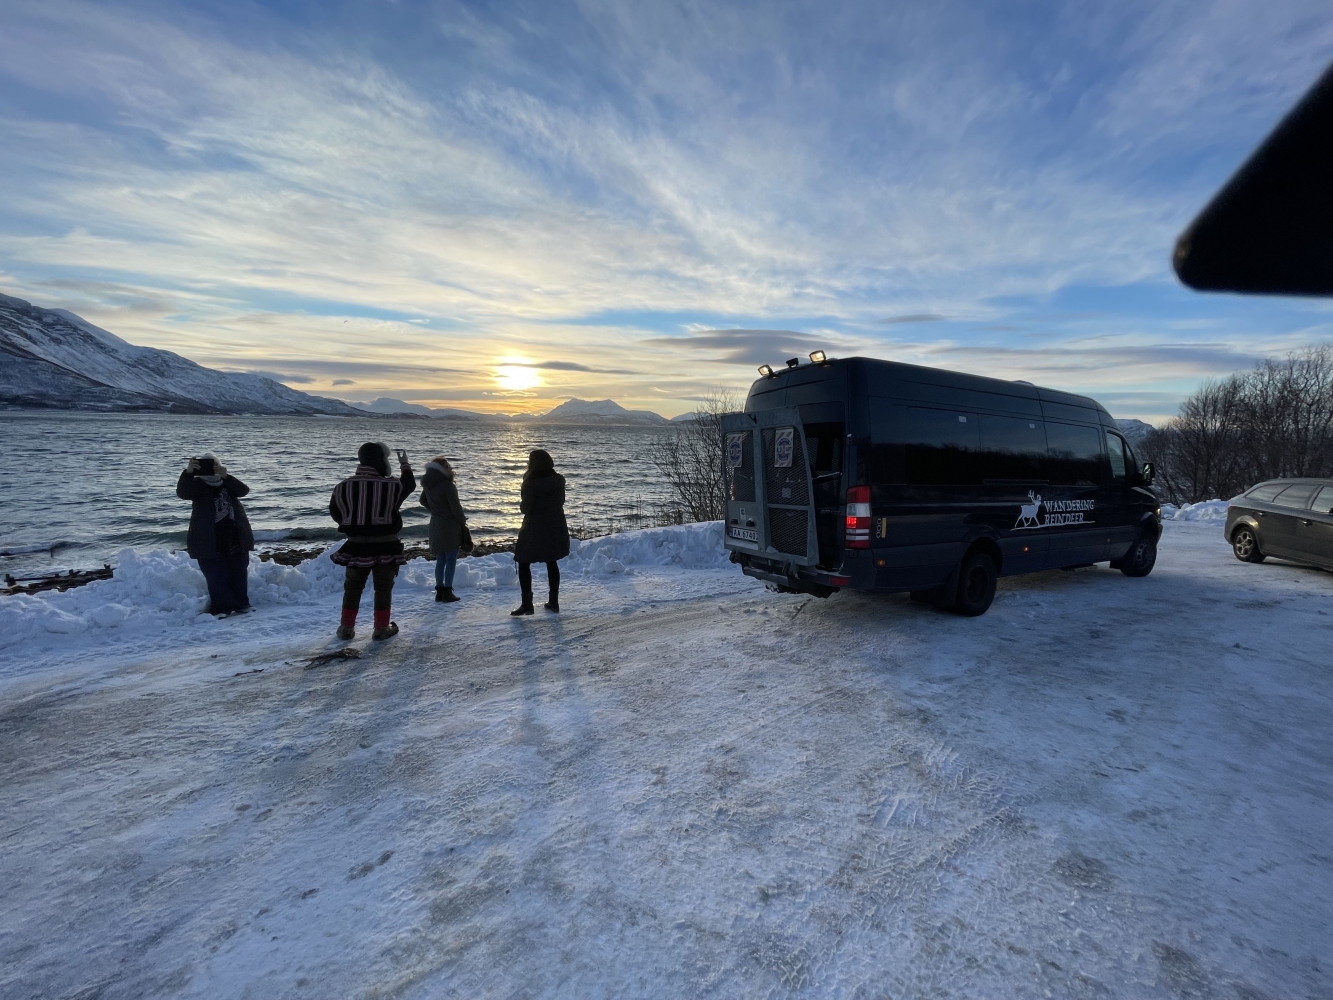 Arctic Fjords and Reindeer Experience – Small group tour